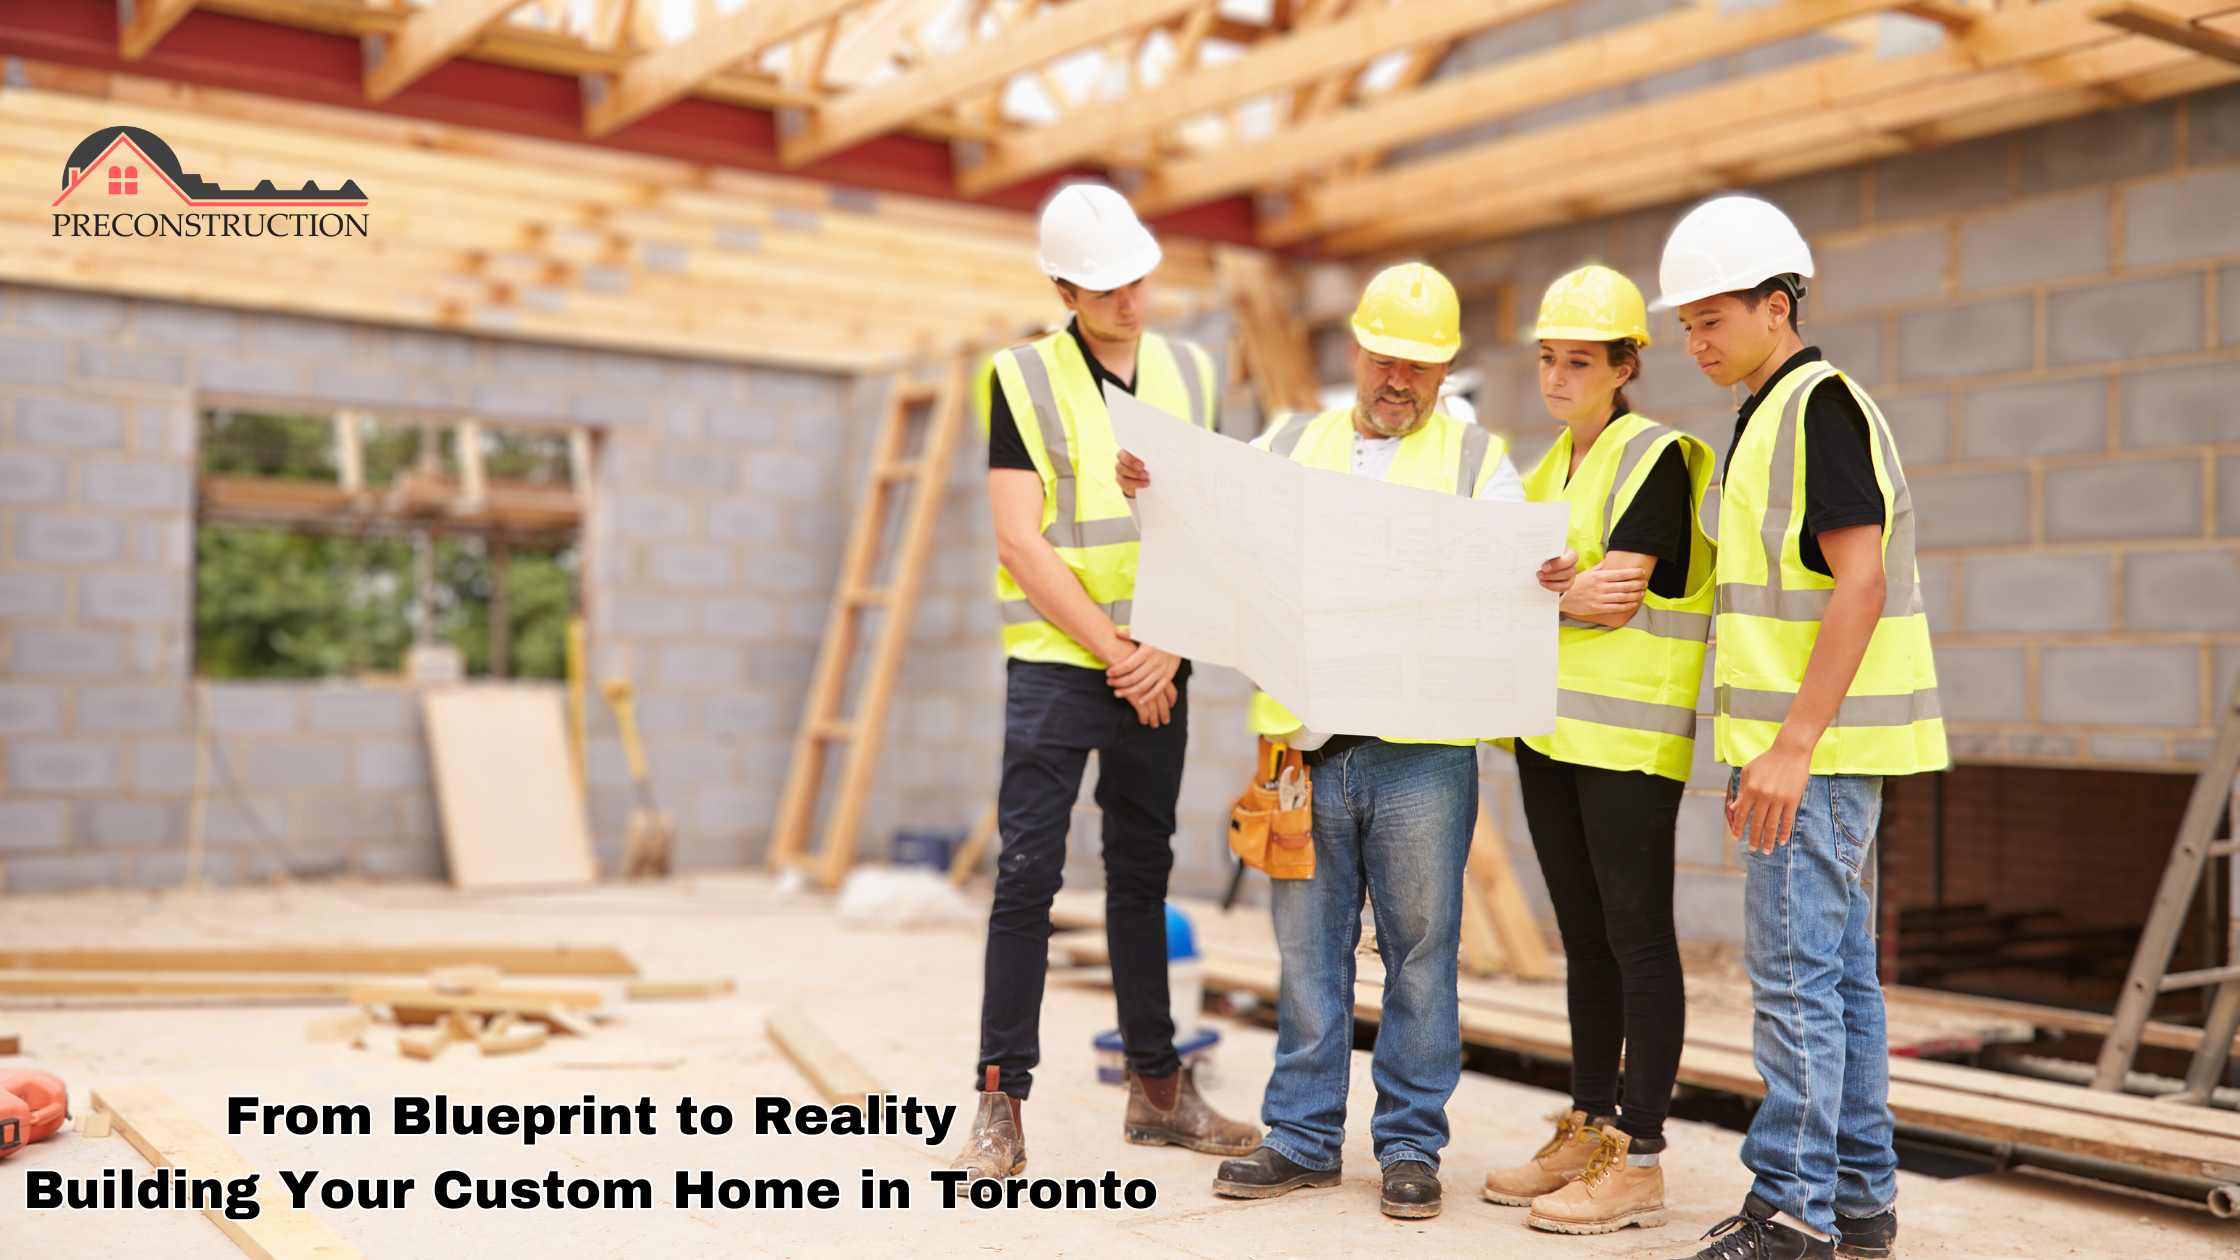 Custom Home Builders in Toronto: Your Ultimate Pre-Construction Checklist